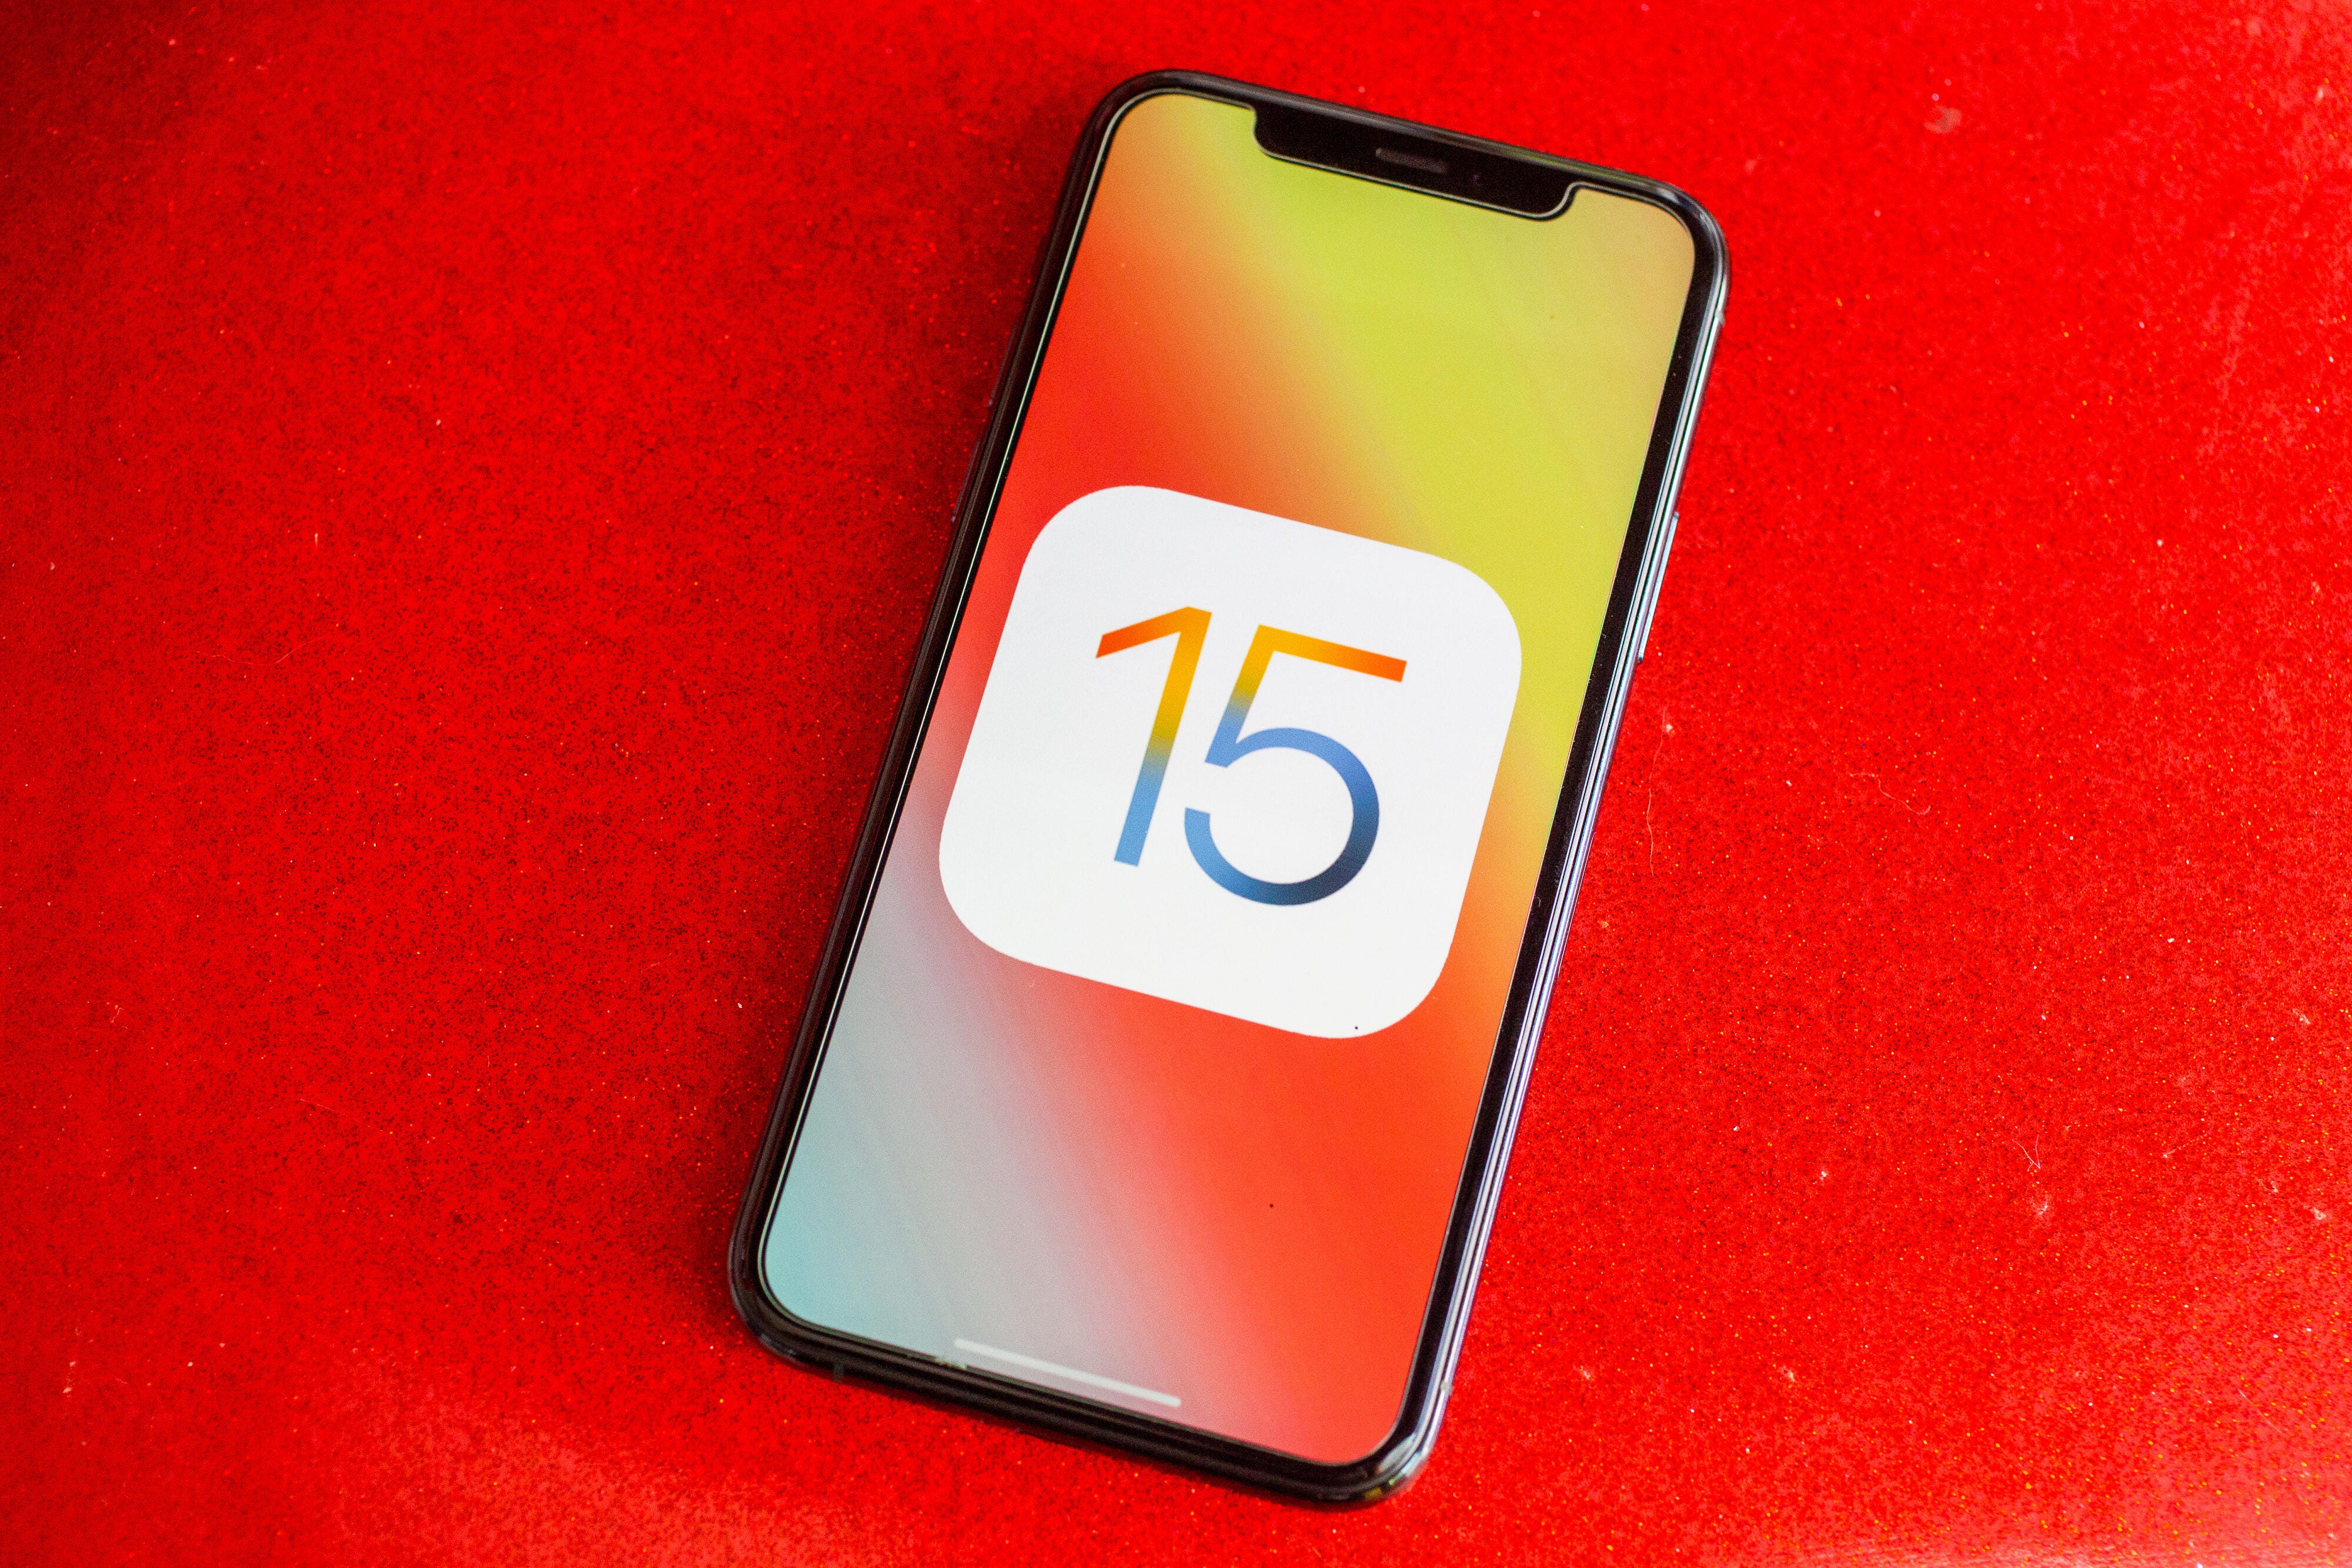 Apple’s iOS 15 update is here. Follow this checklist to get your iPhone ready